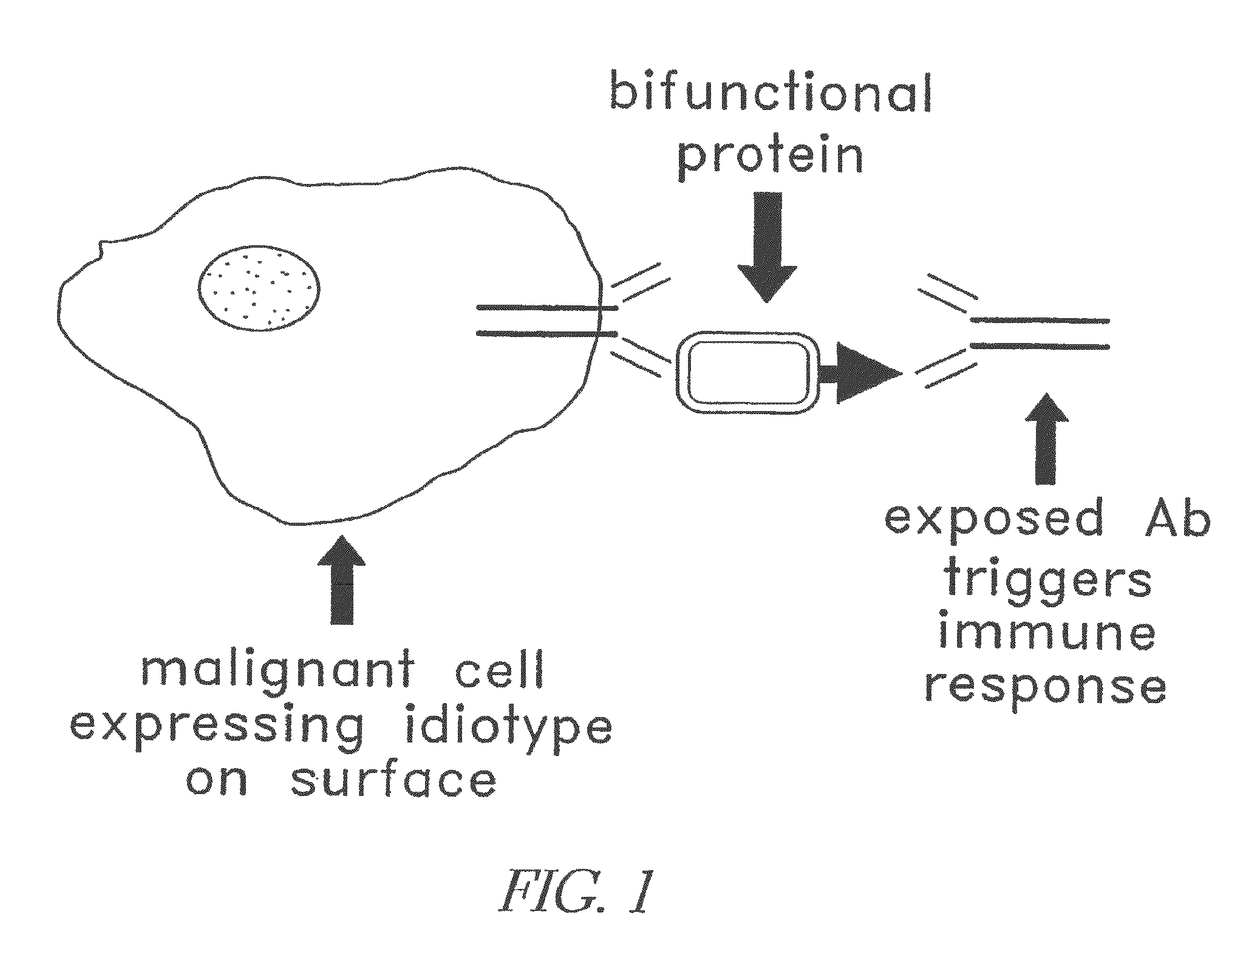 Modular targeted therapeutic agents and methods of making same